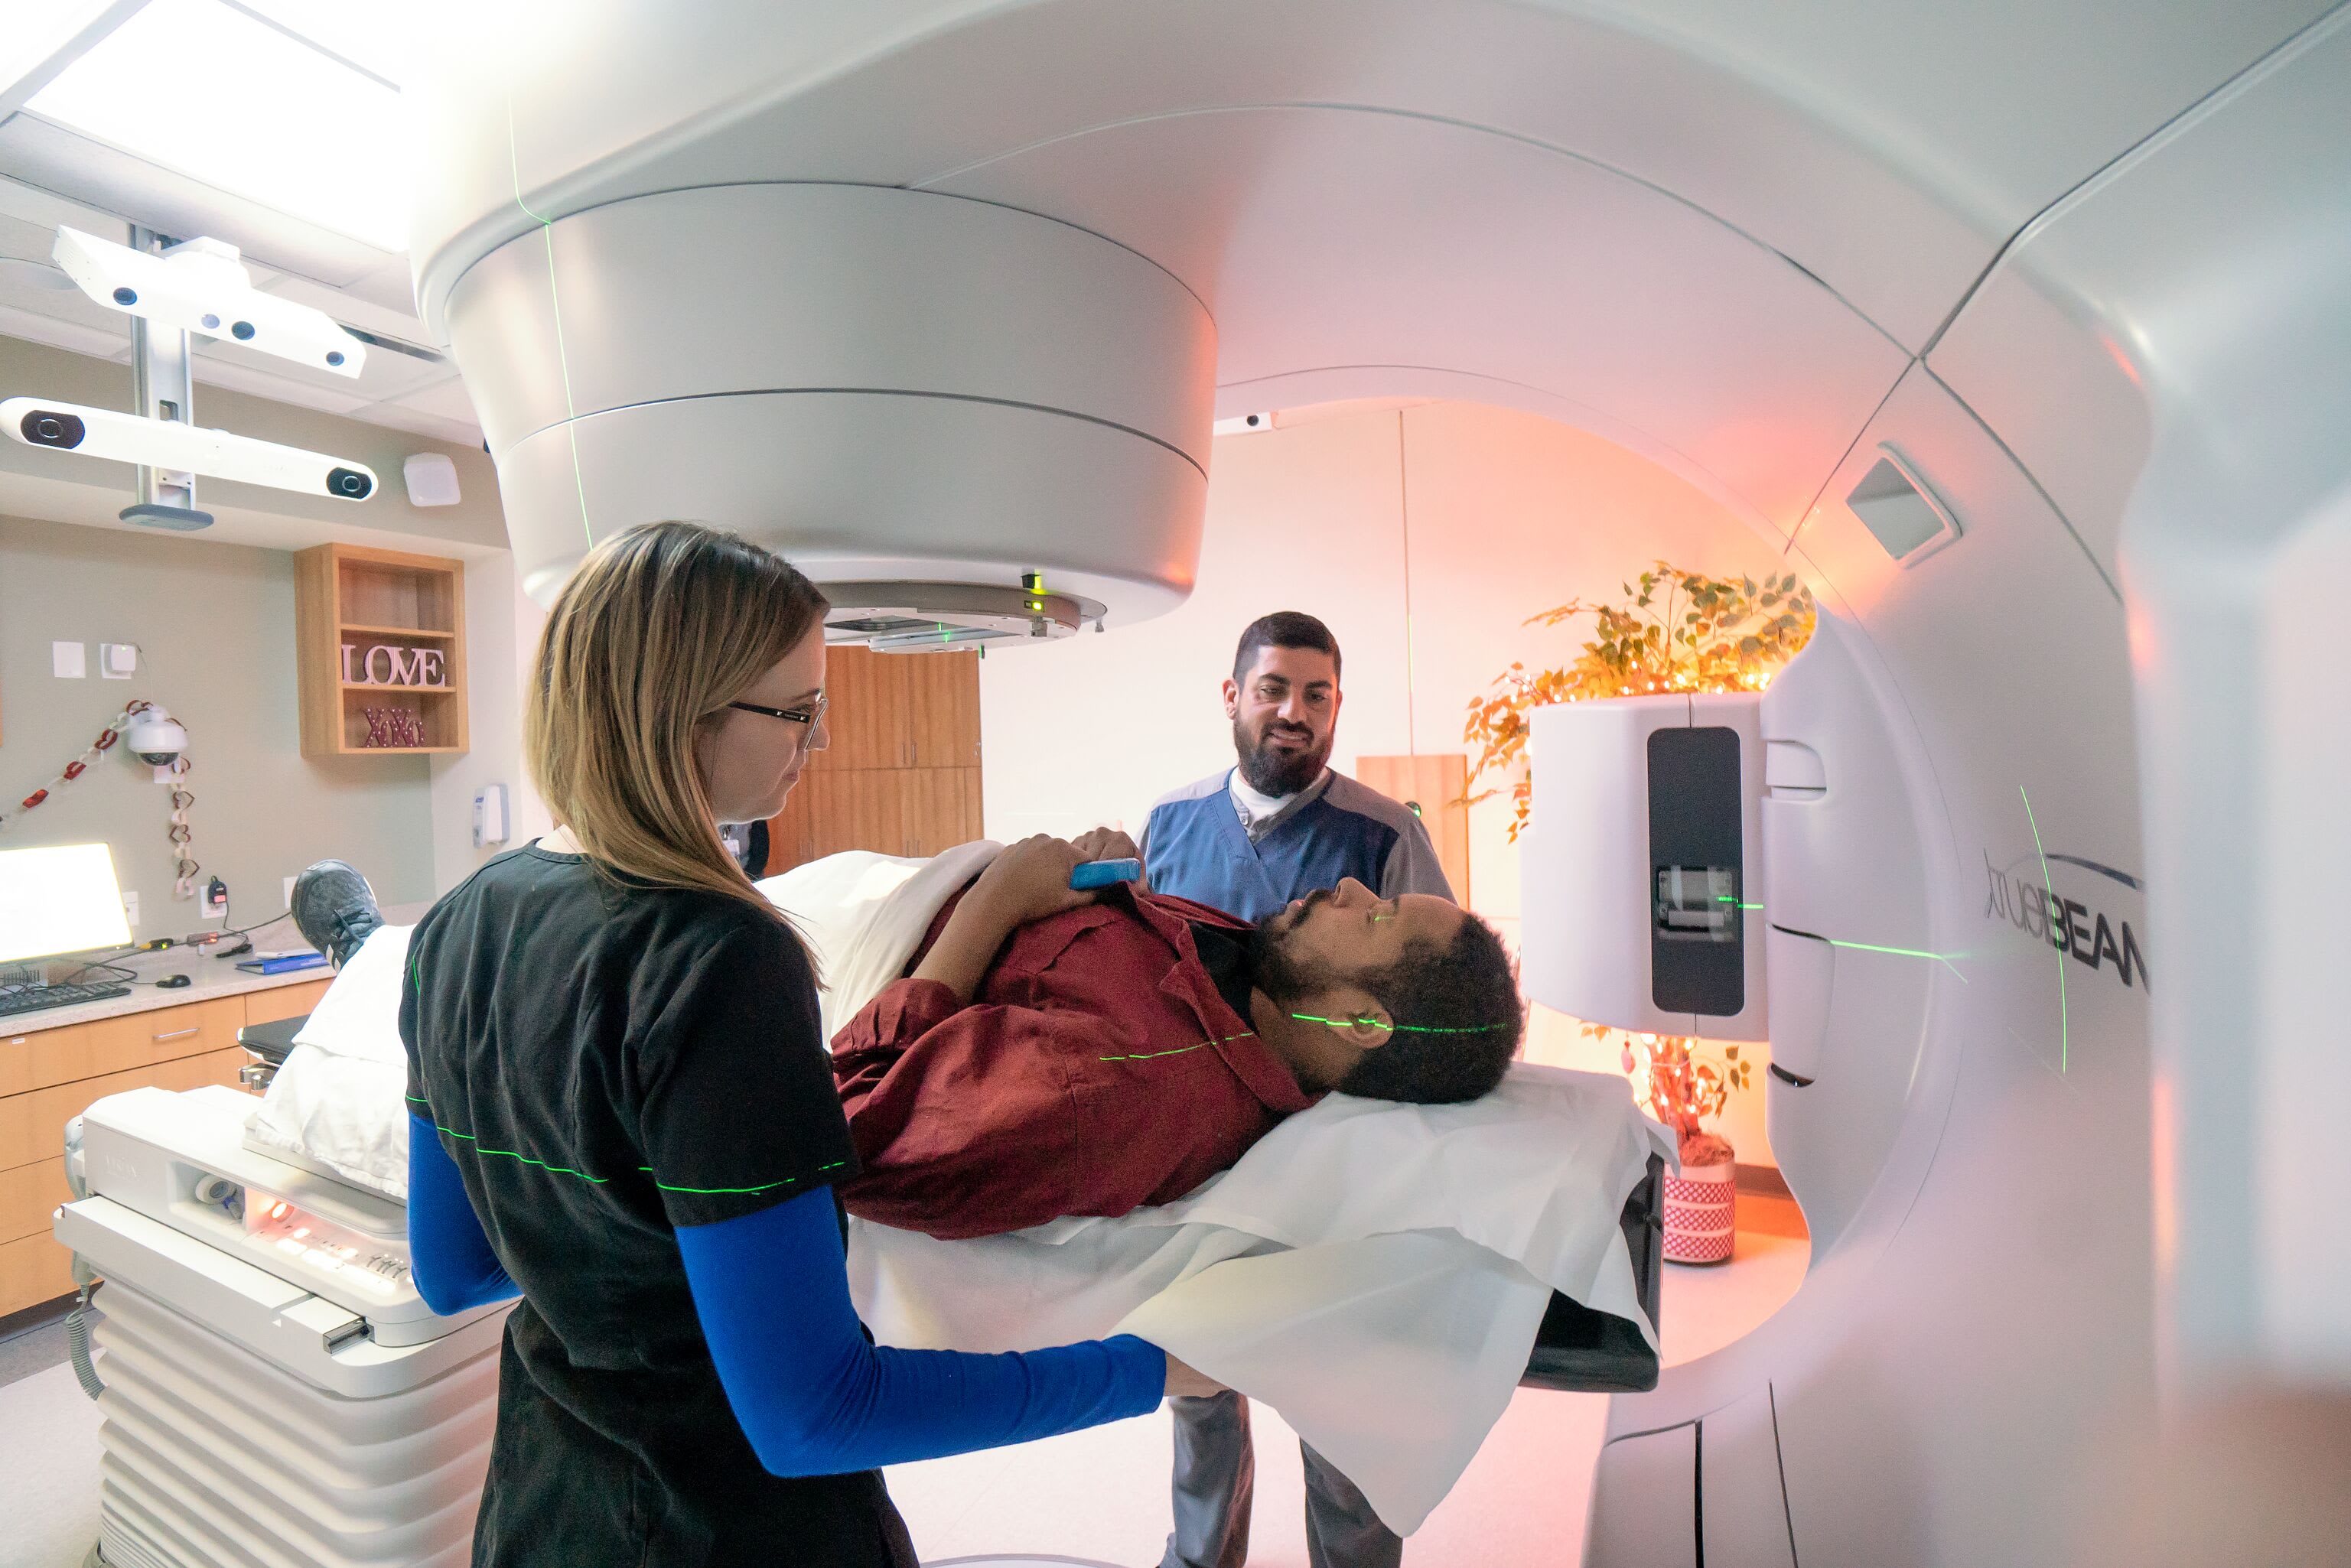 Radiation therapy - what to expect  University of Iowa Hospitals & Clinics